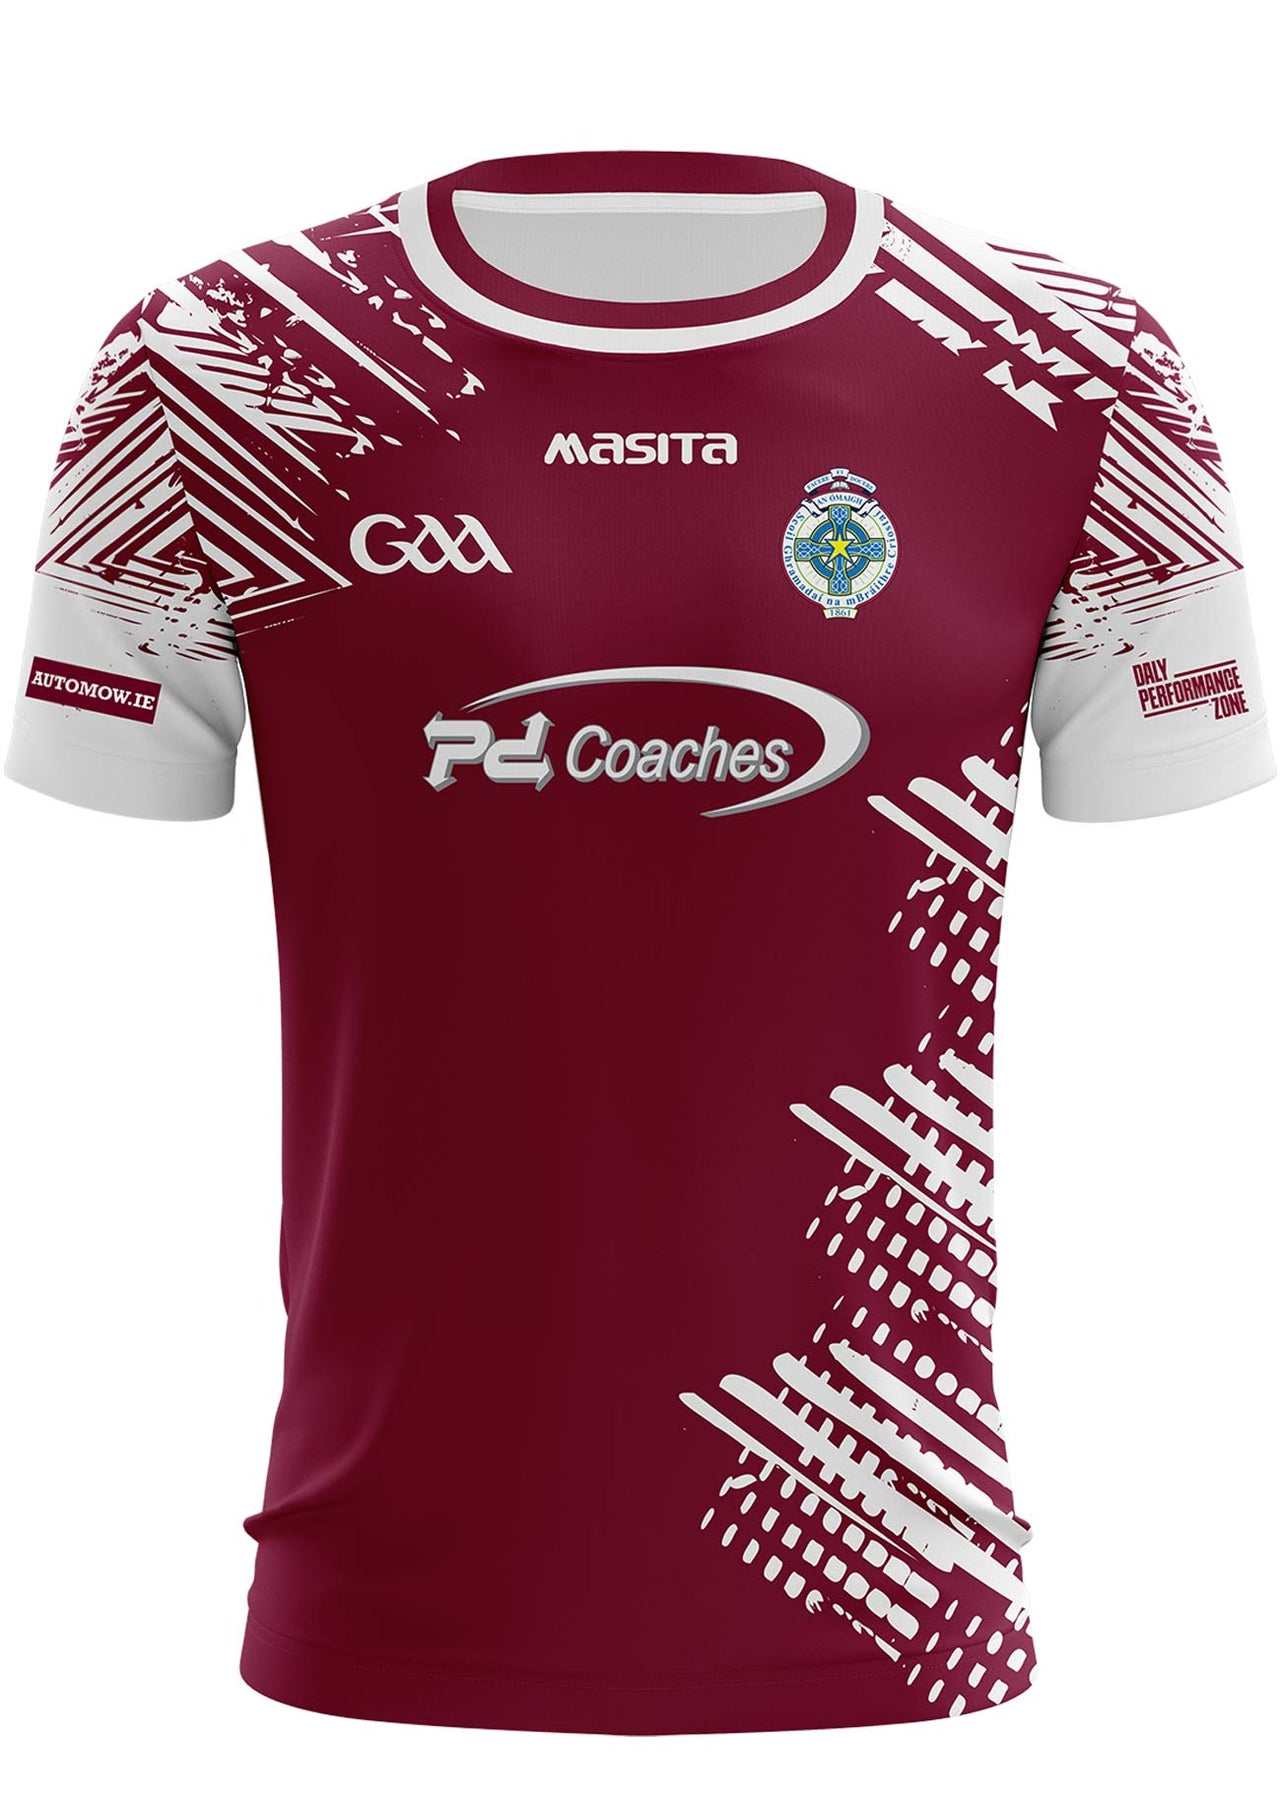 Omagh CBS Home Jersey Player Fit